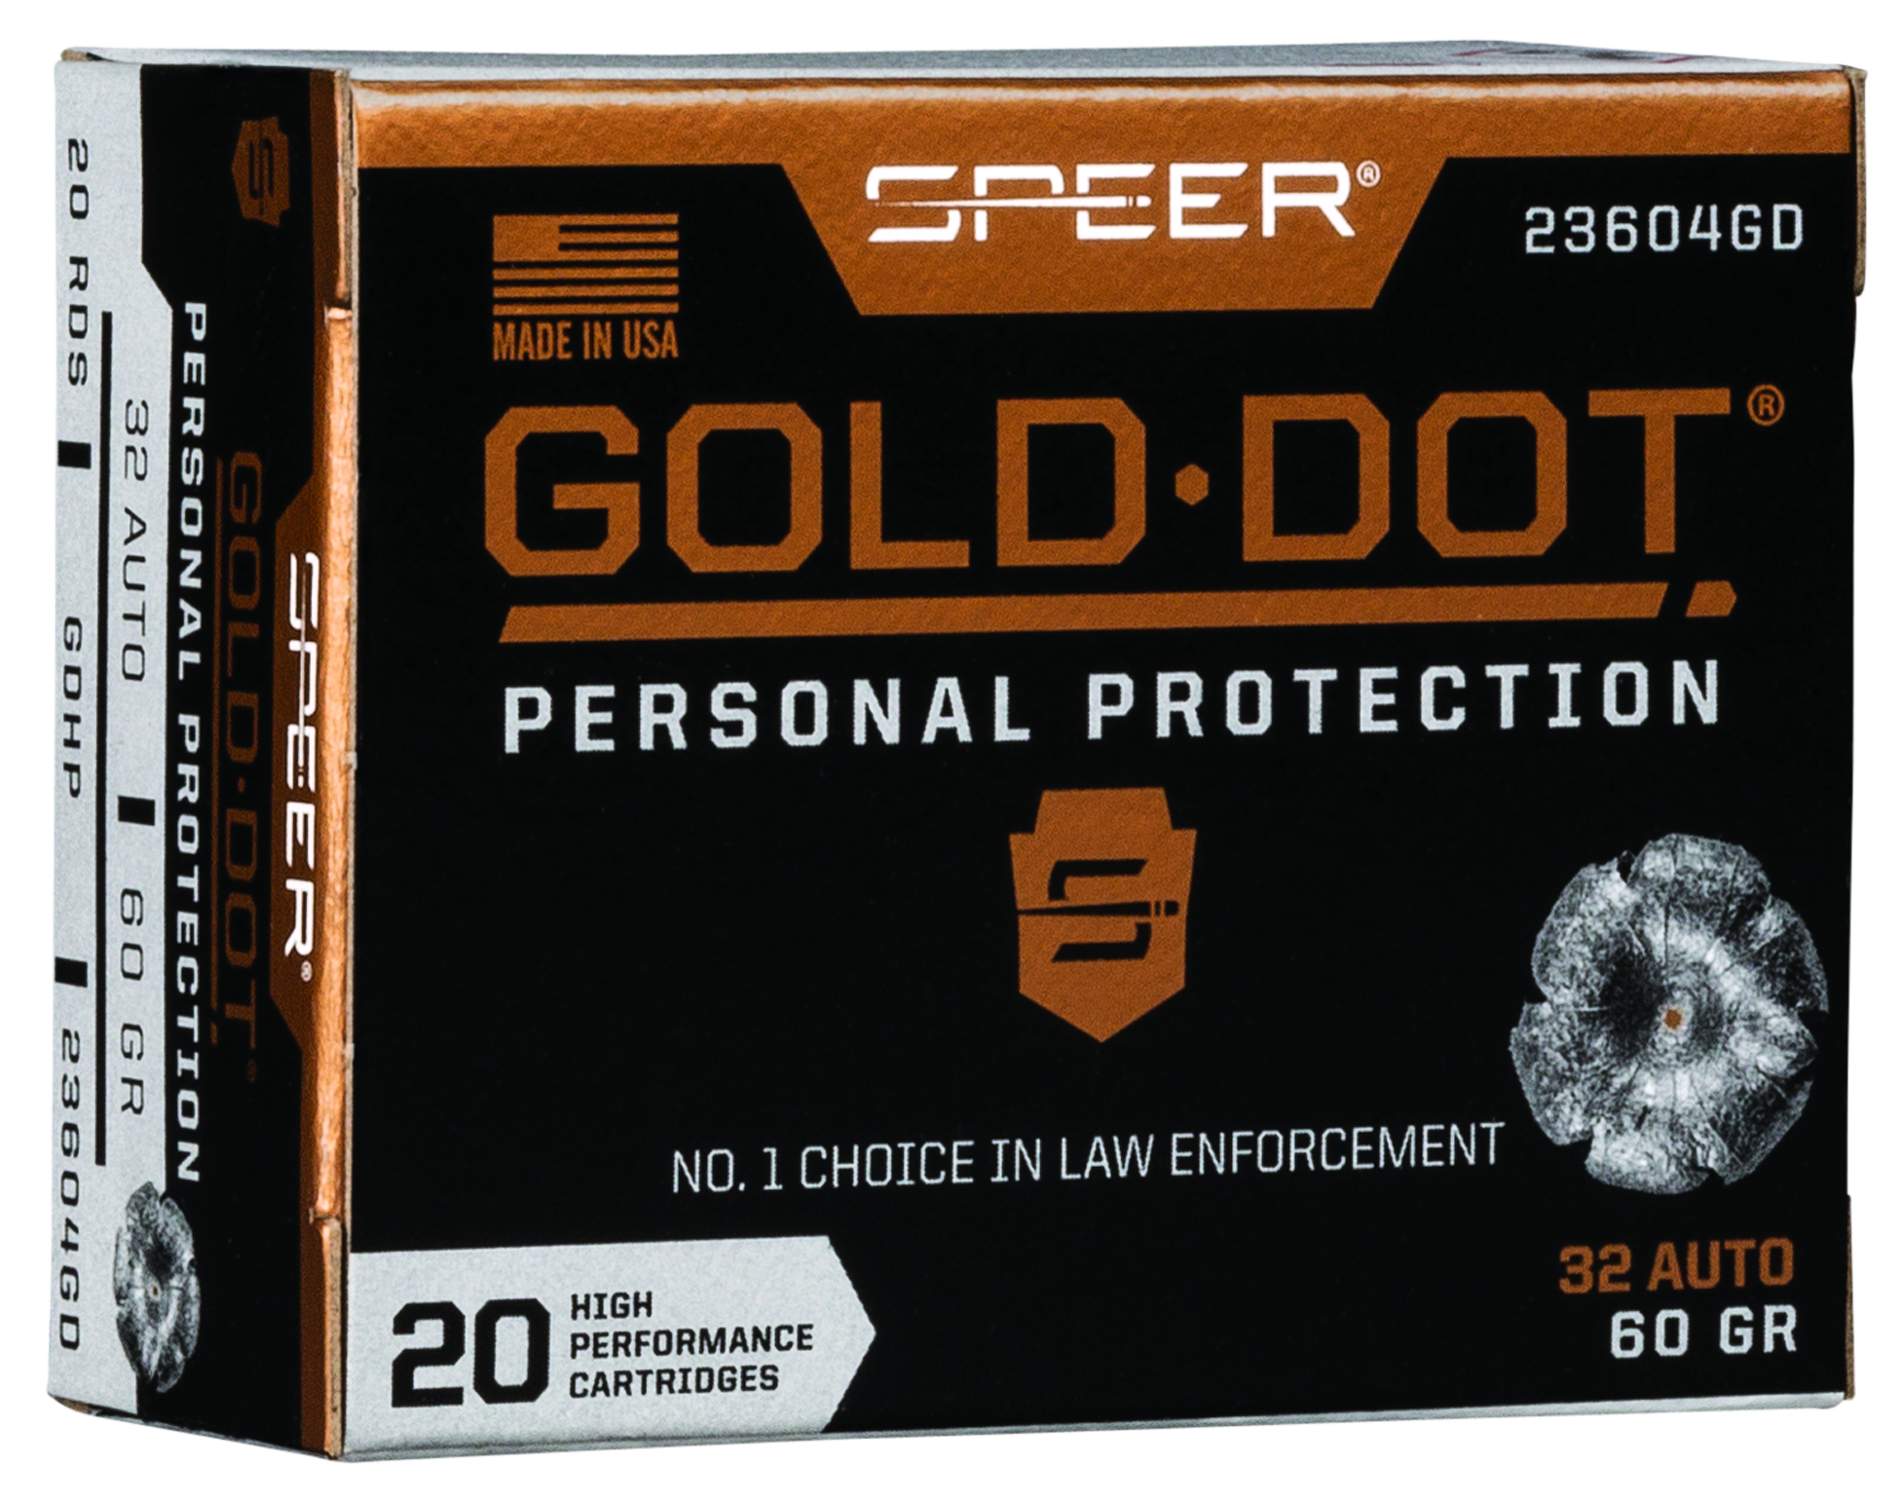 Speer Gold Dot .32 Auto Personal Protection 60 gr.